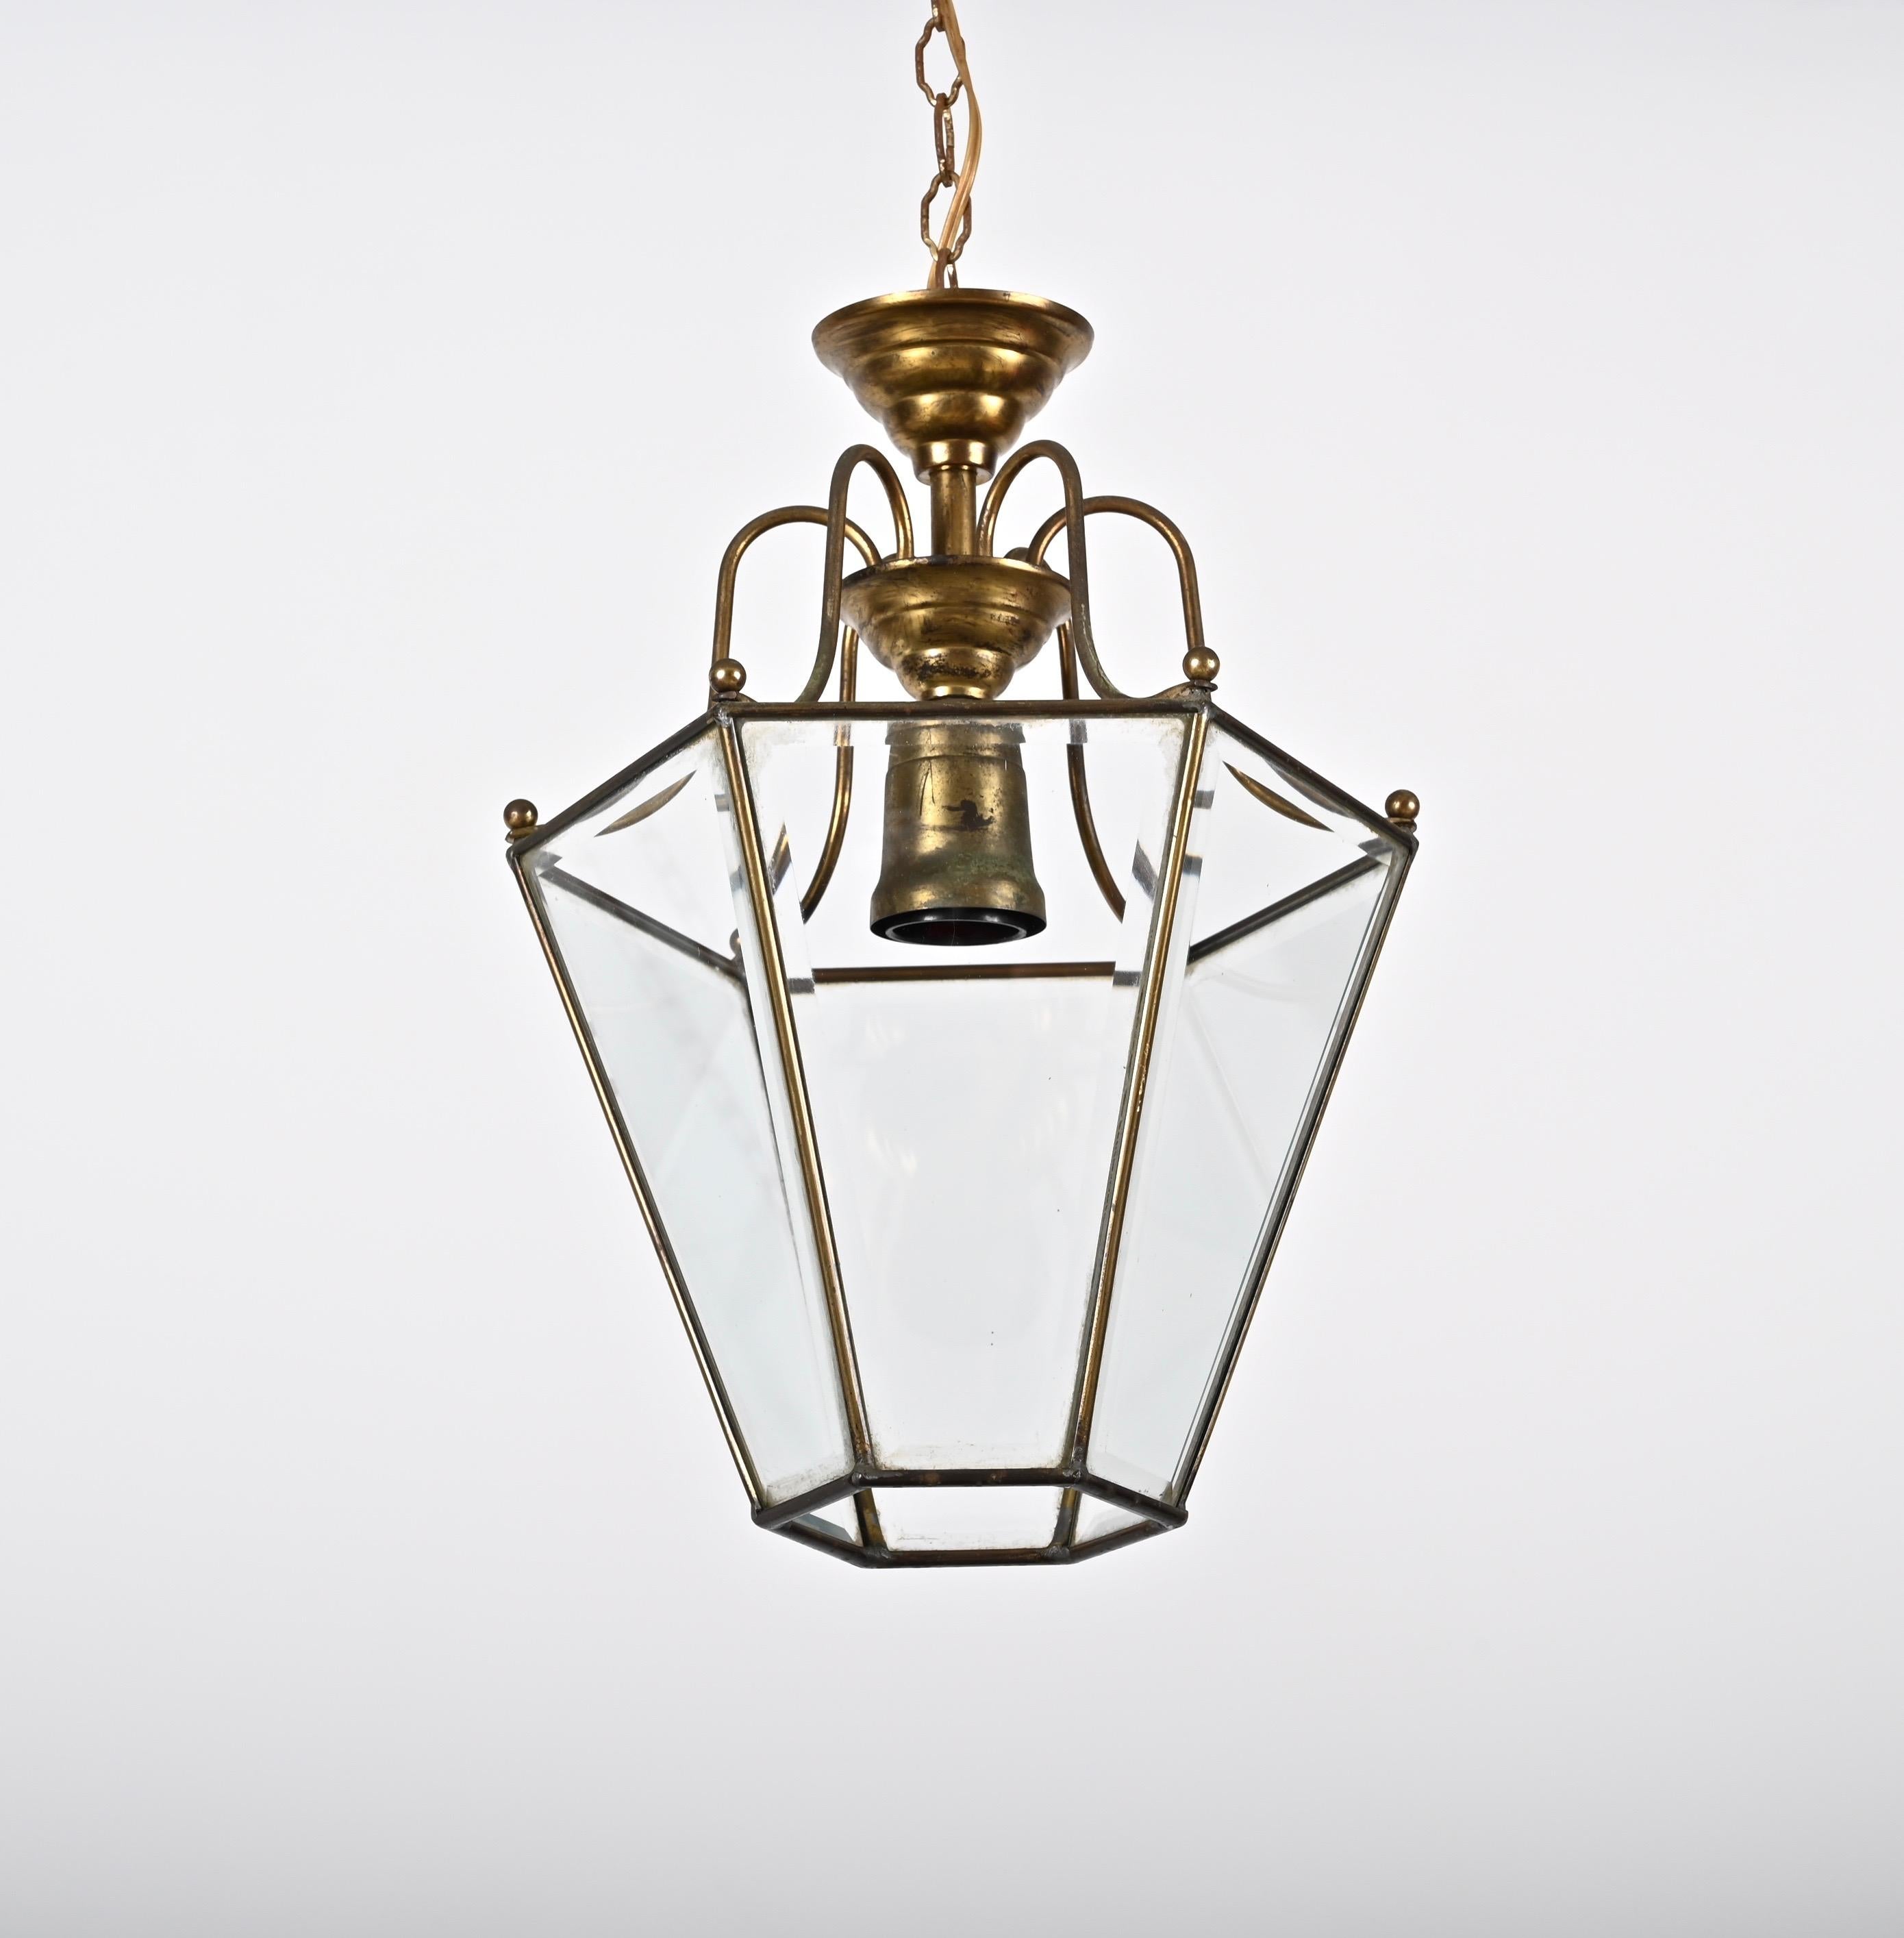 Brass and Beveled Glass Hexagonal Italian Chandelier After Adolf Loos, 1950s For Sale 3